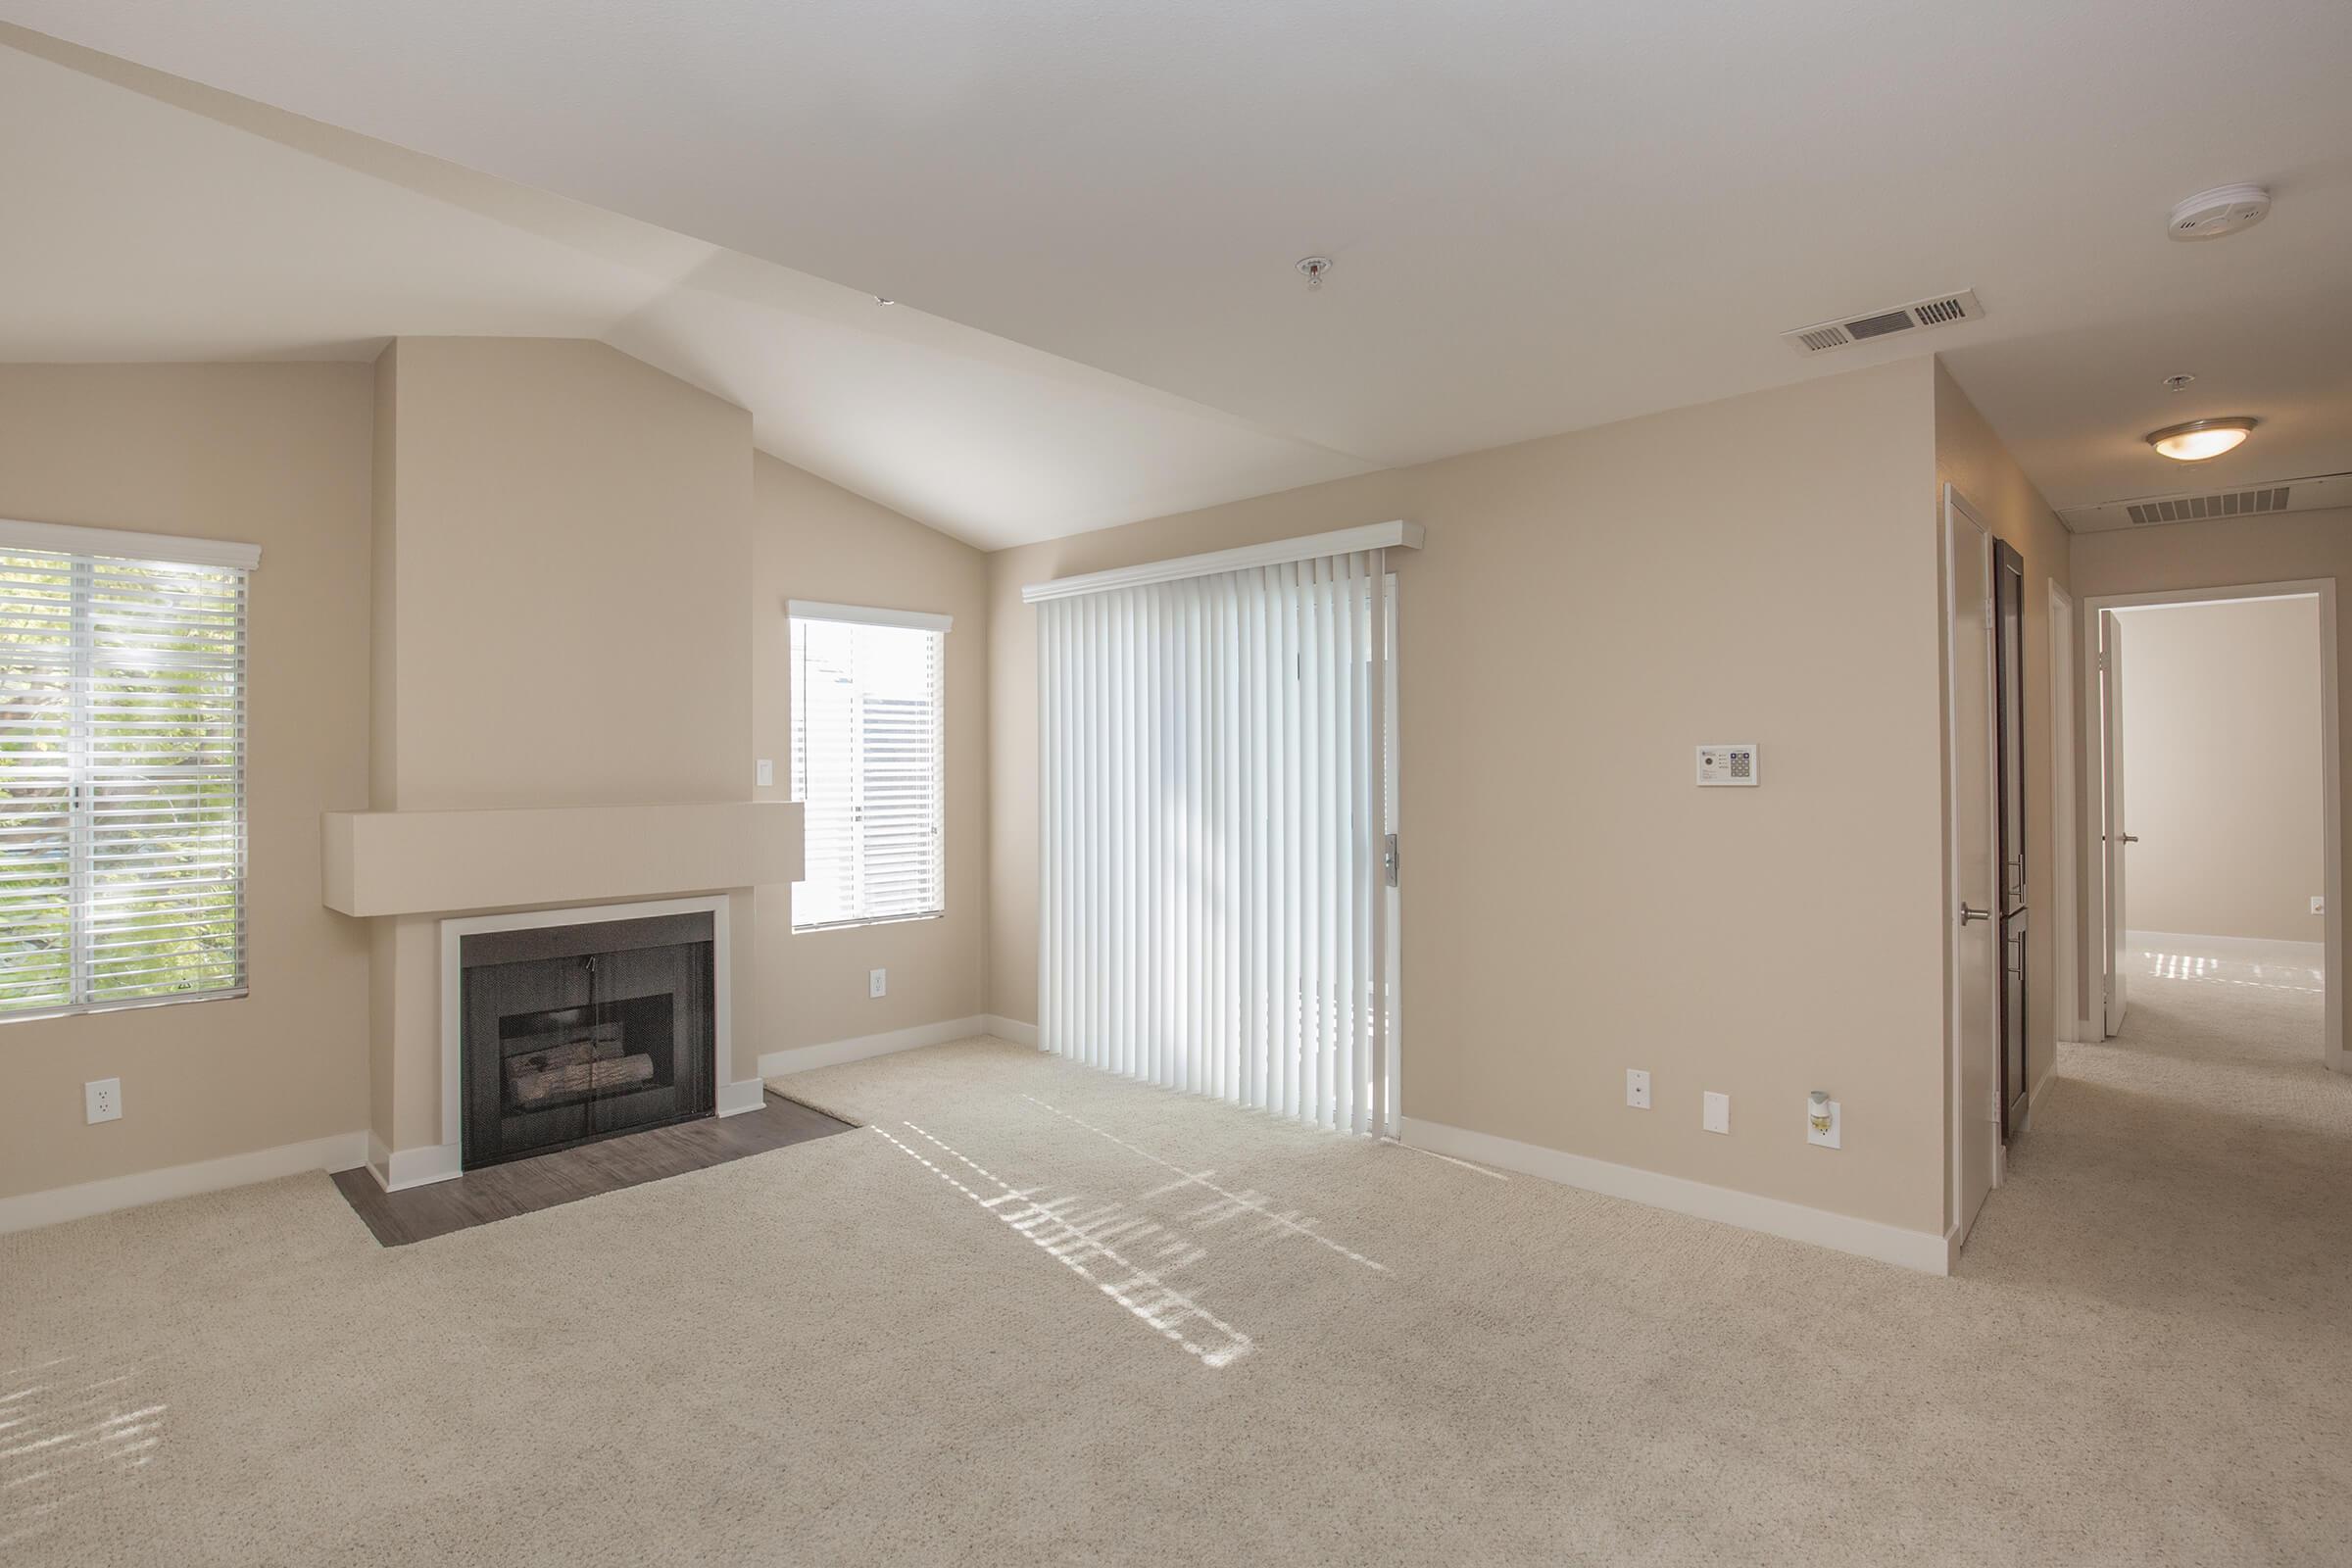 Unfurnished living room with fireplace